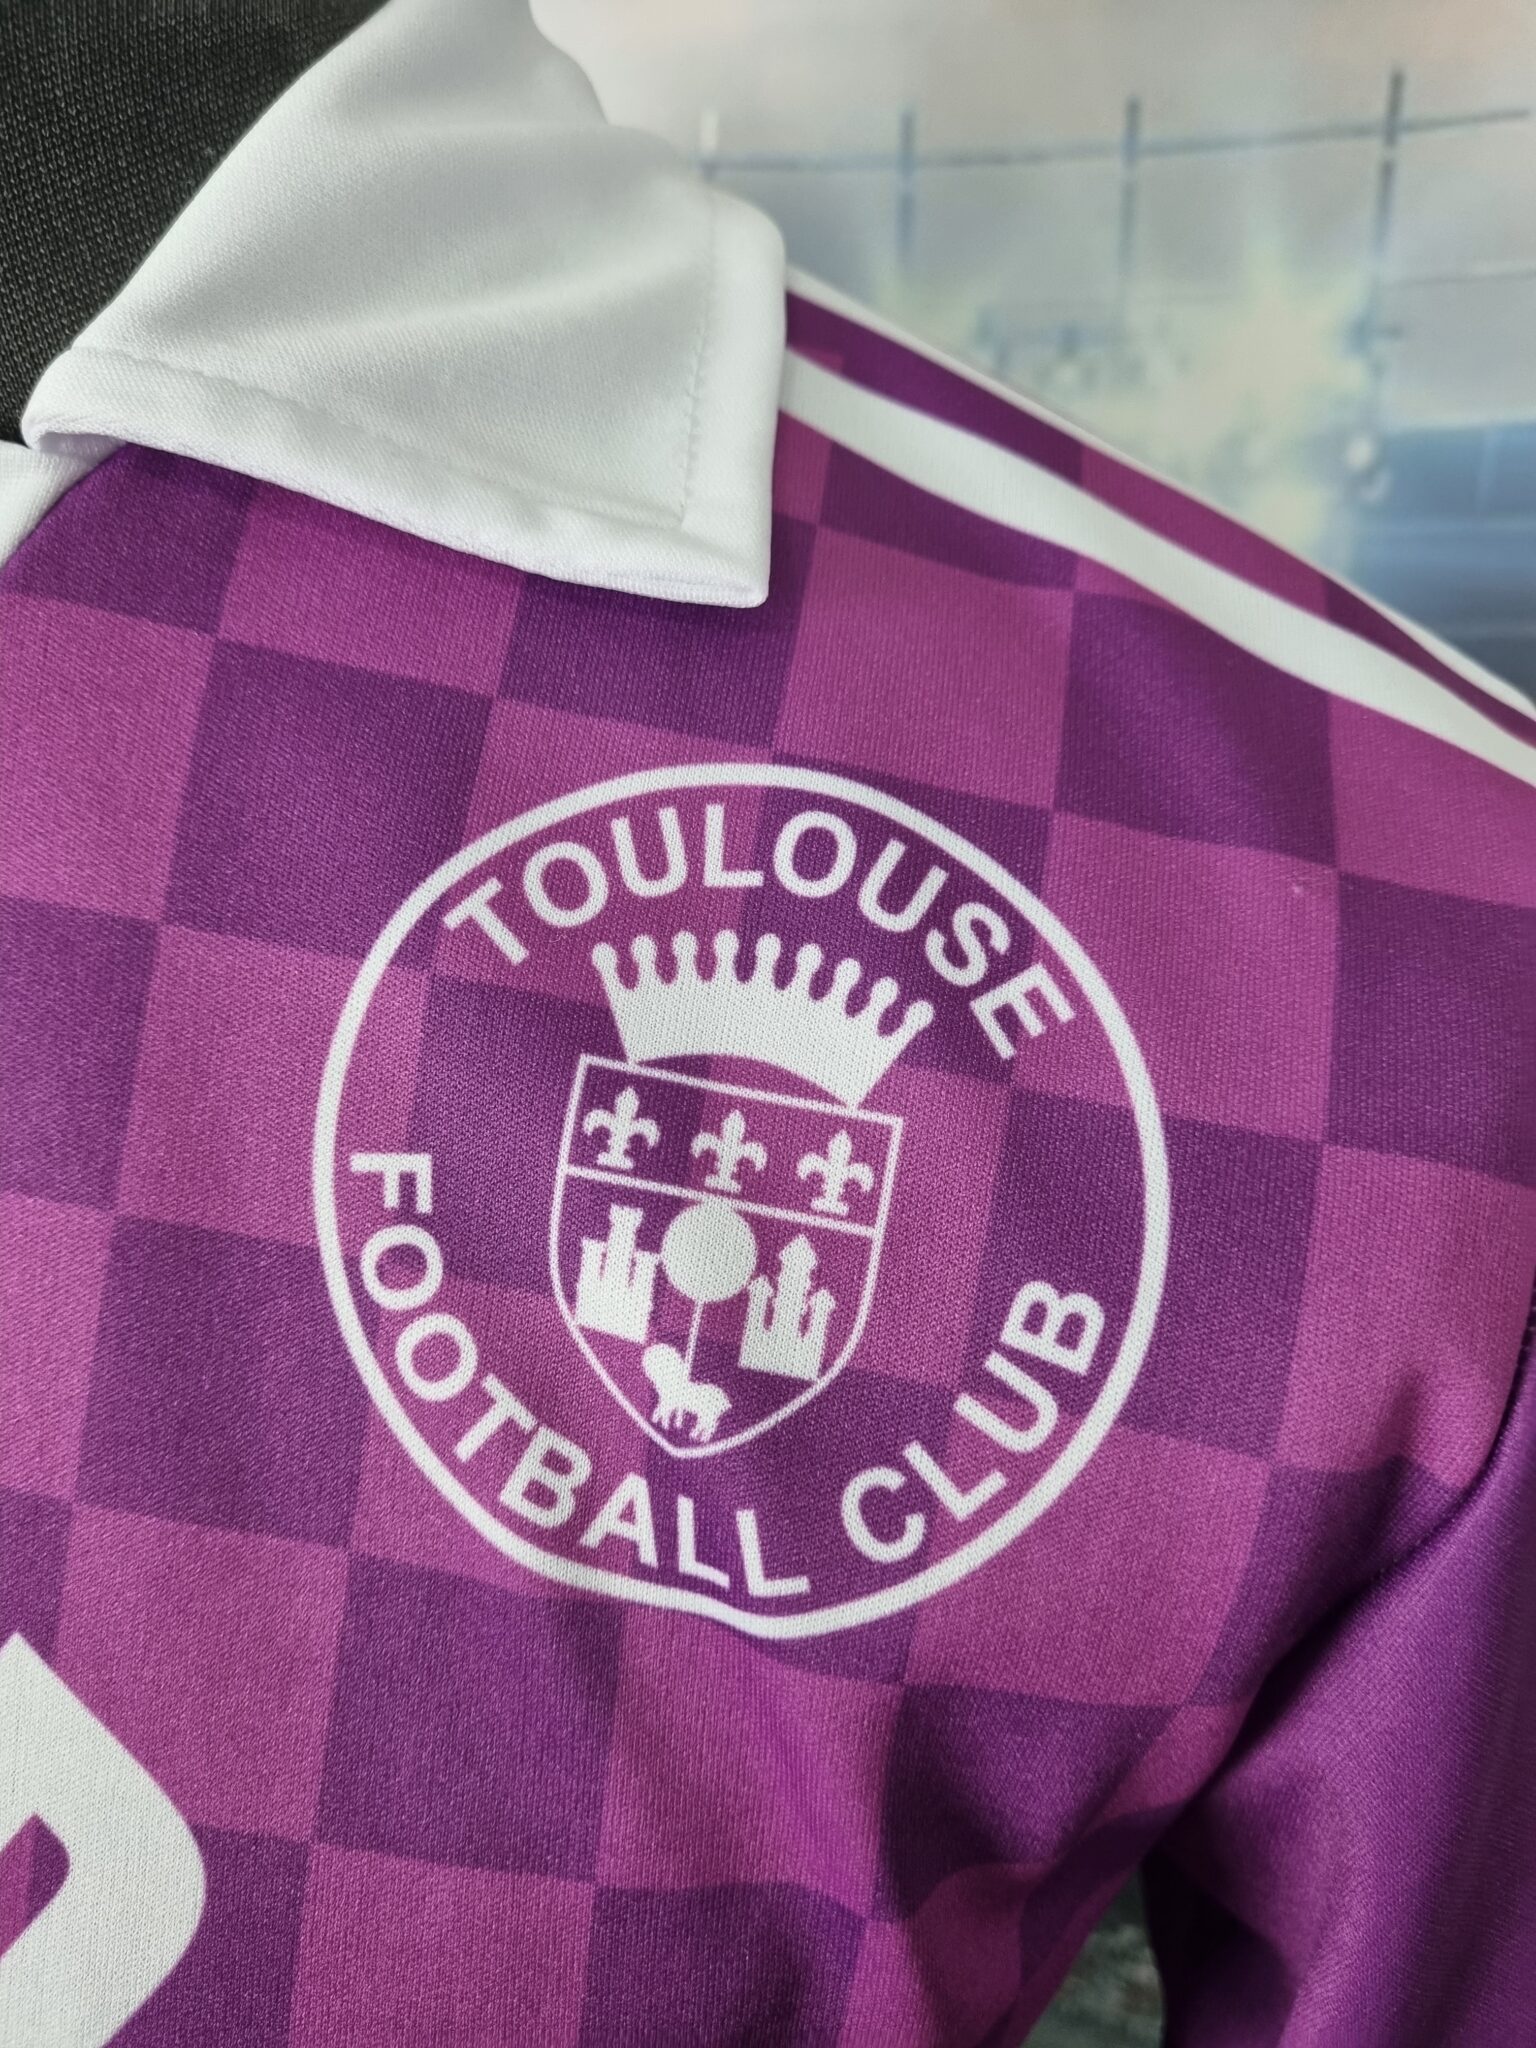 Toulouse FC Football Shirt 1985/1986 Maillot France Vintage Jersey Retro TFC - Sport Club Memories